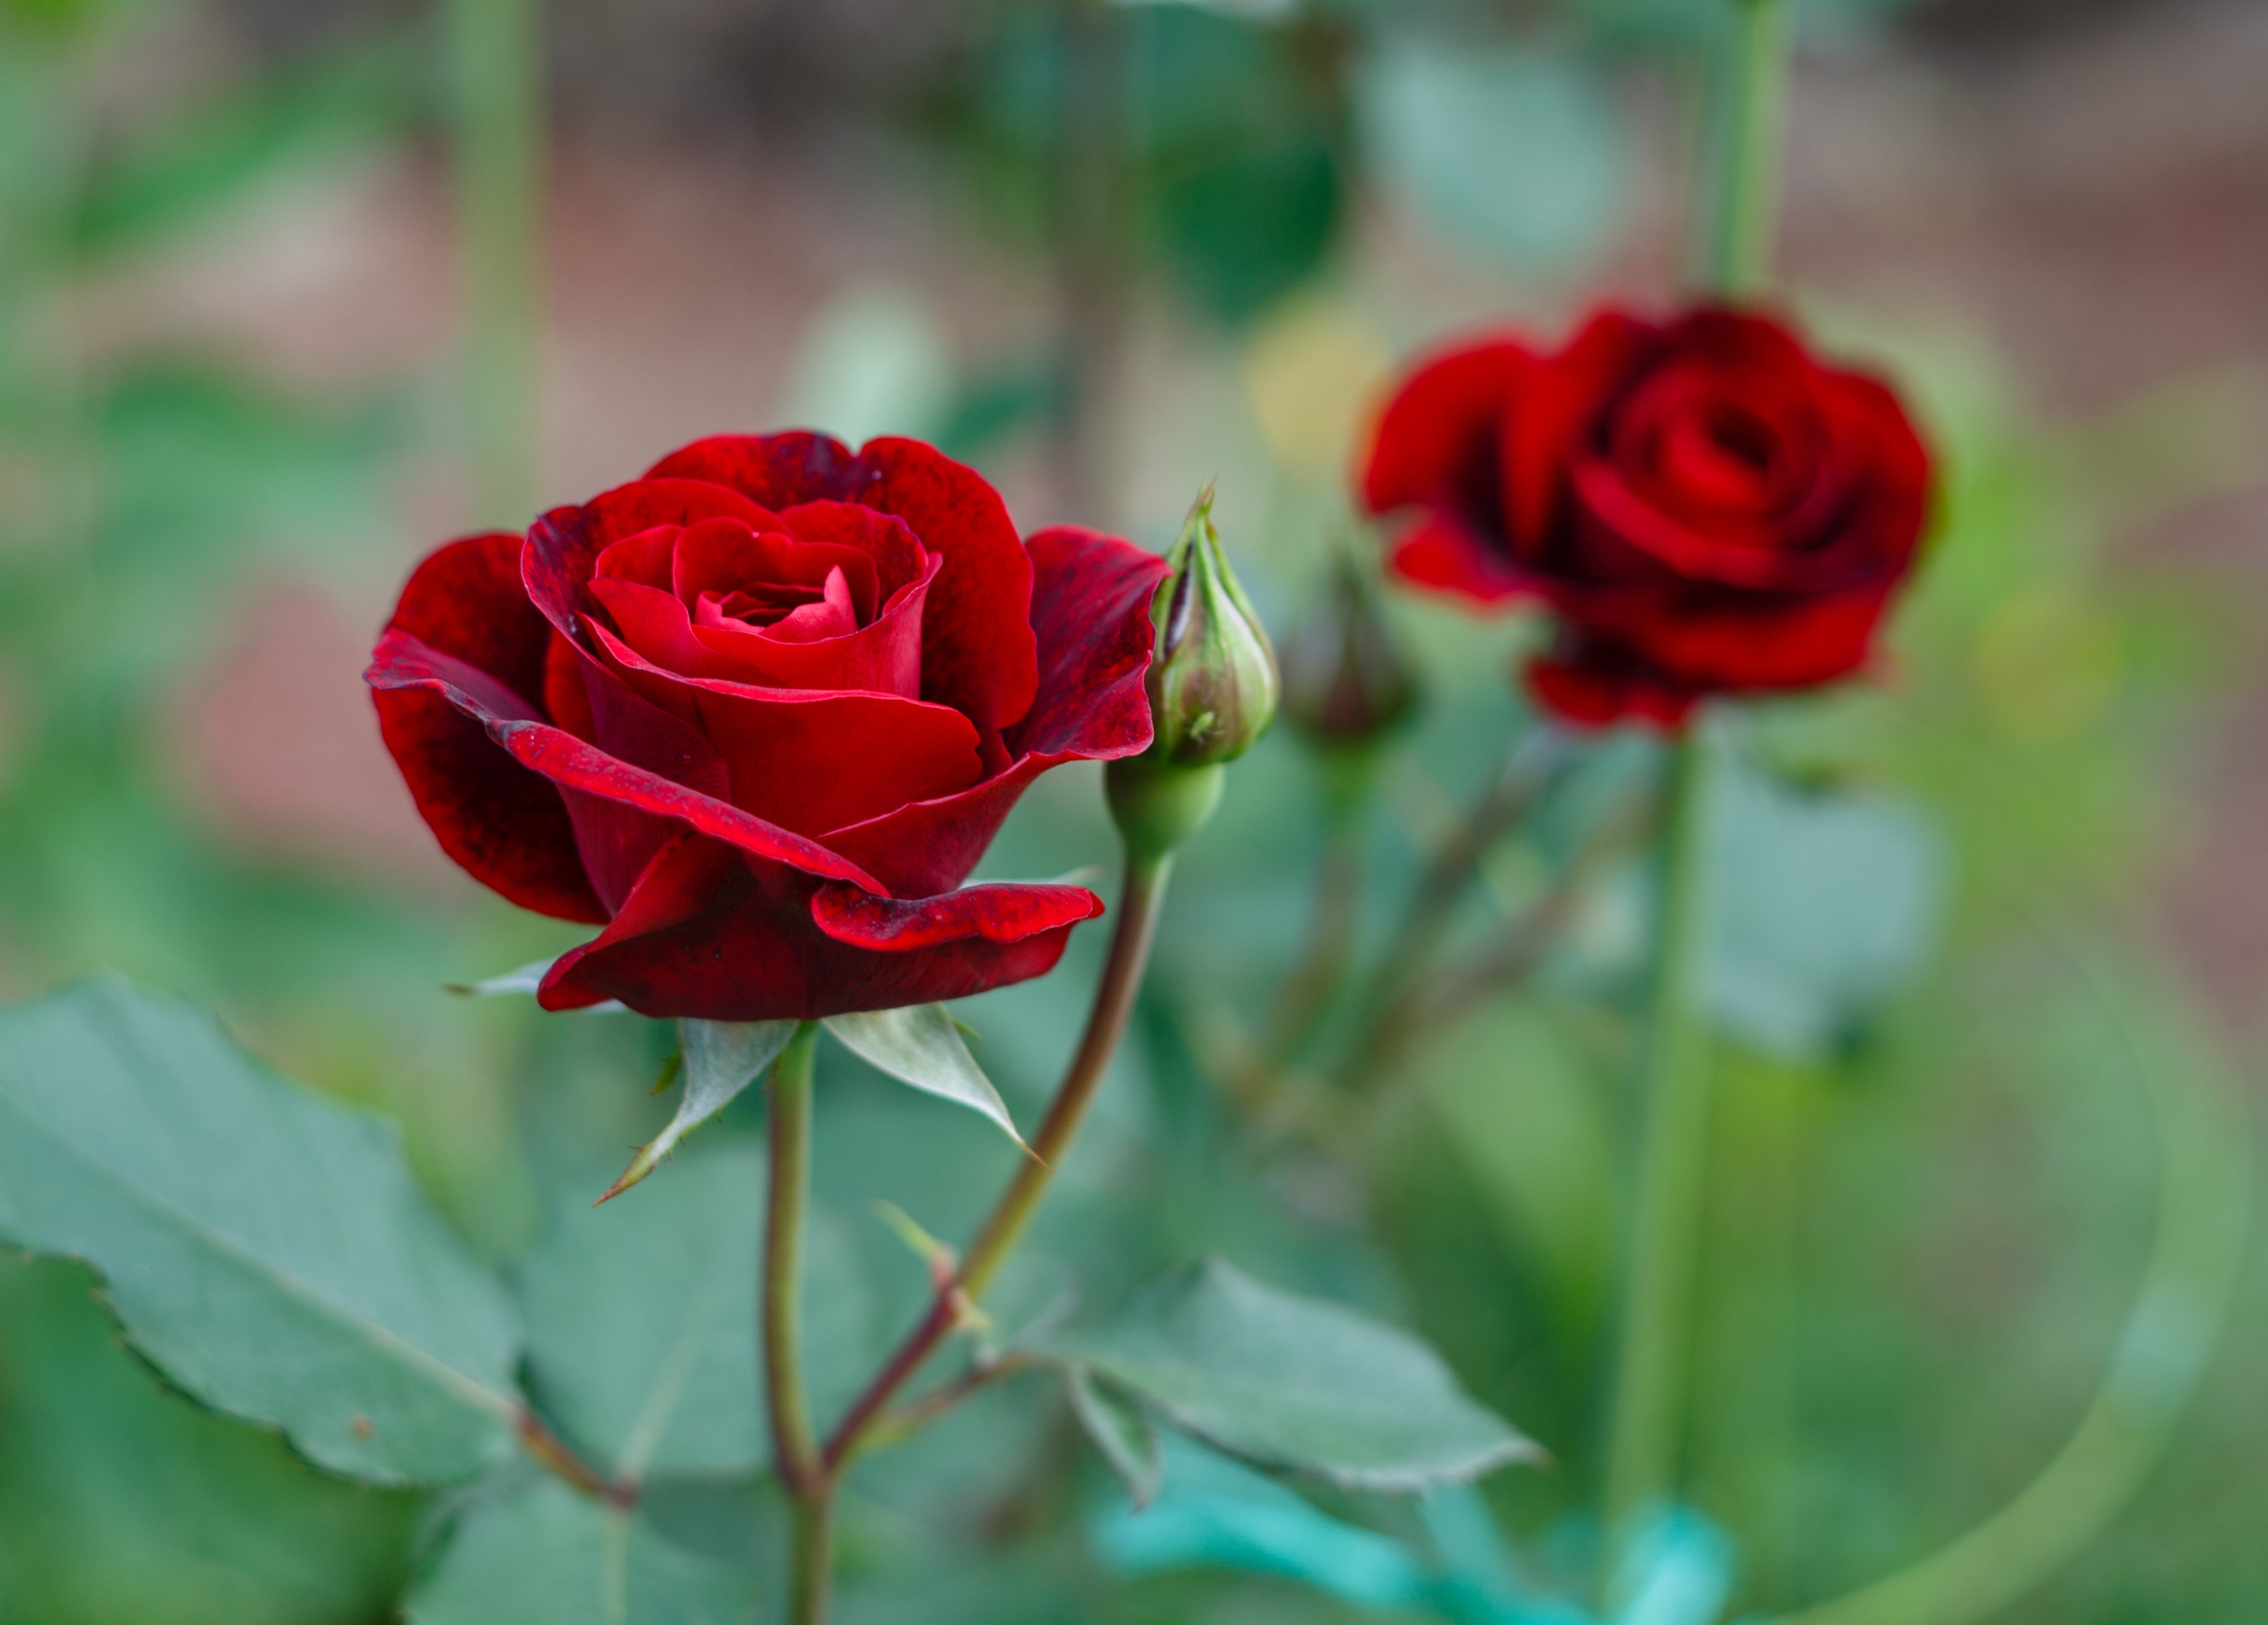  Pruning roses: when to make the cut